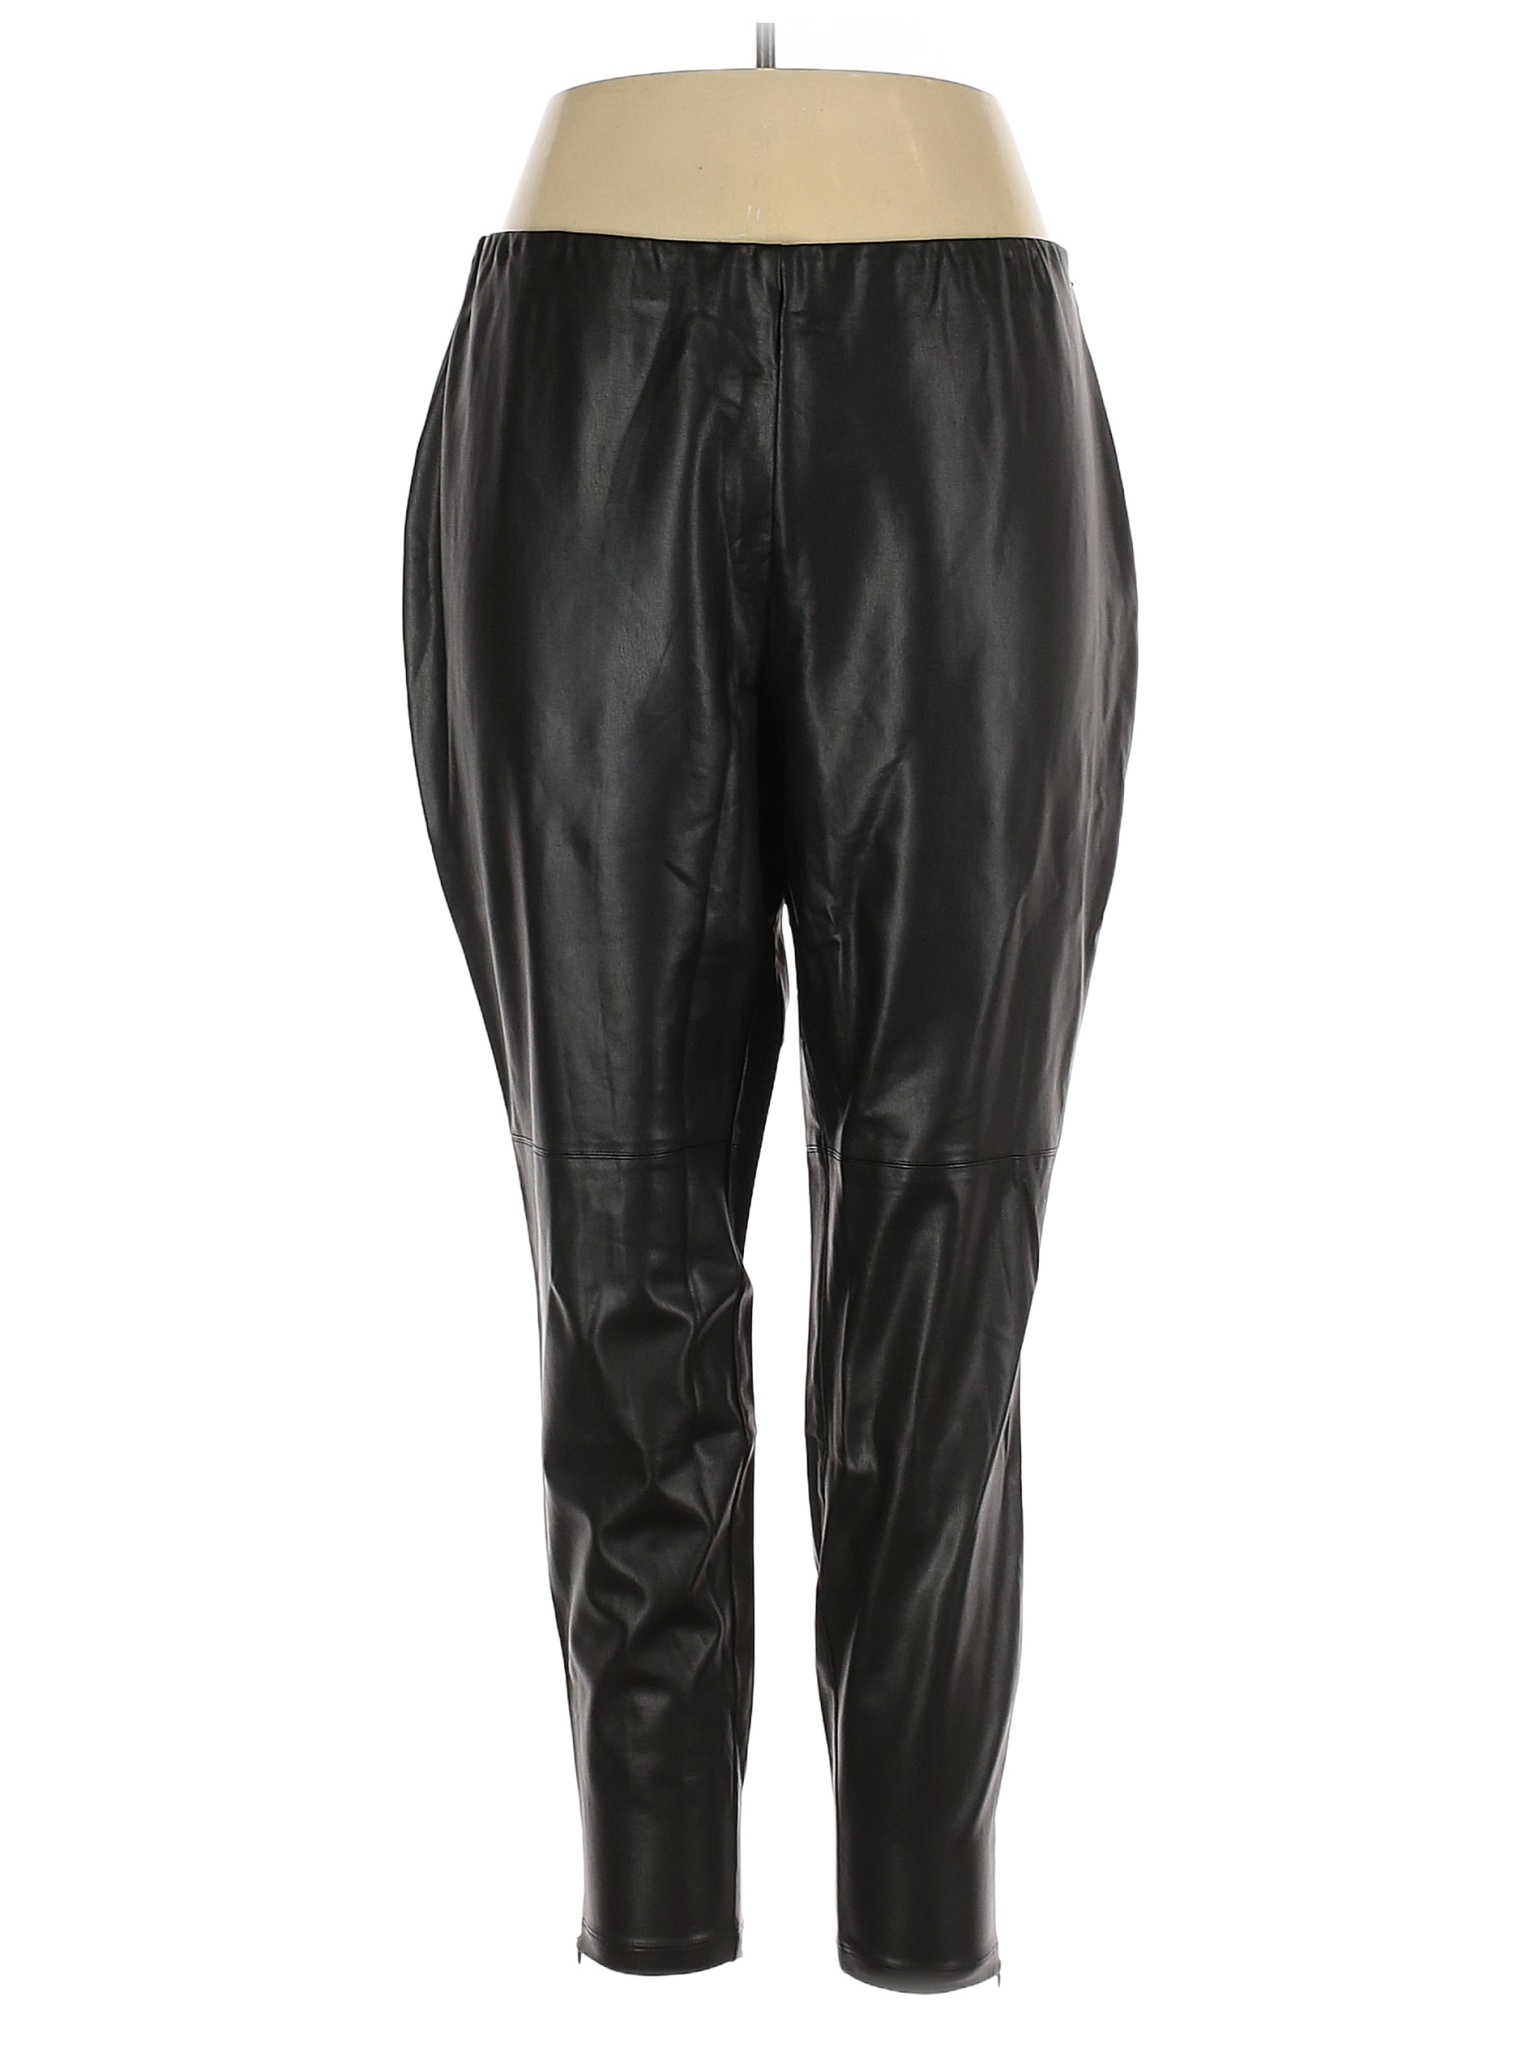 Lisa Rinna Solid Black Faux Leather Pants Size 22 (Plus) - 76% off ...